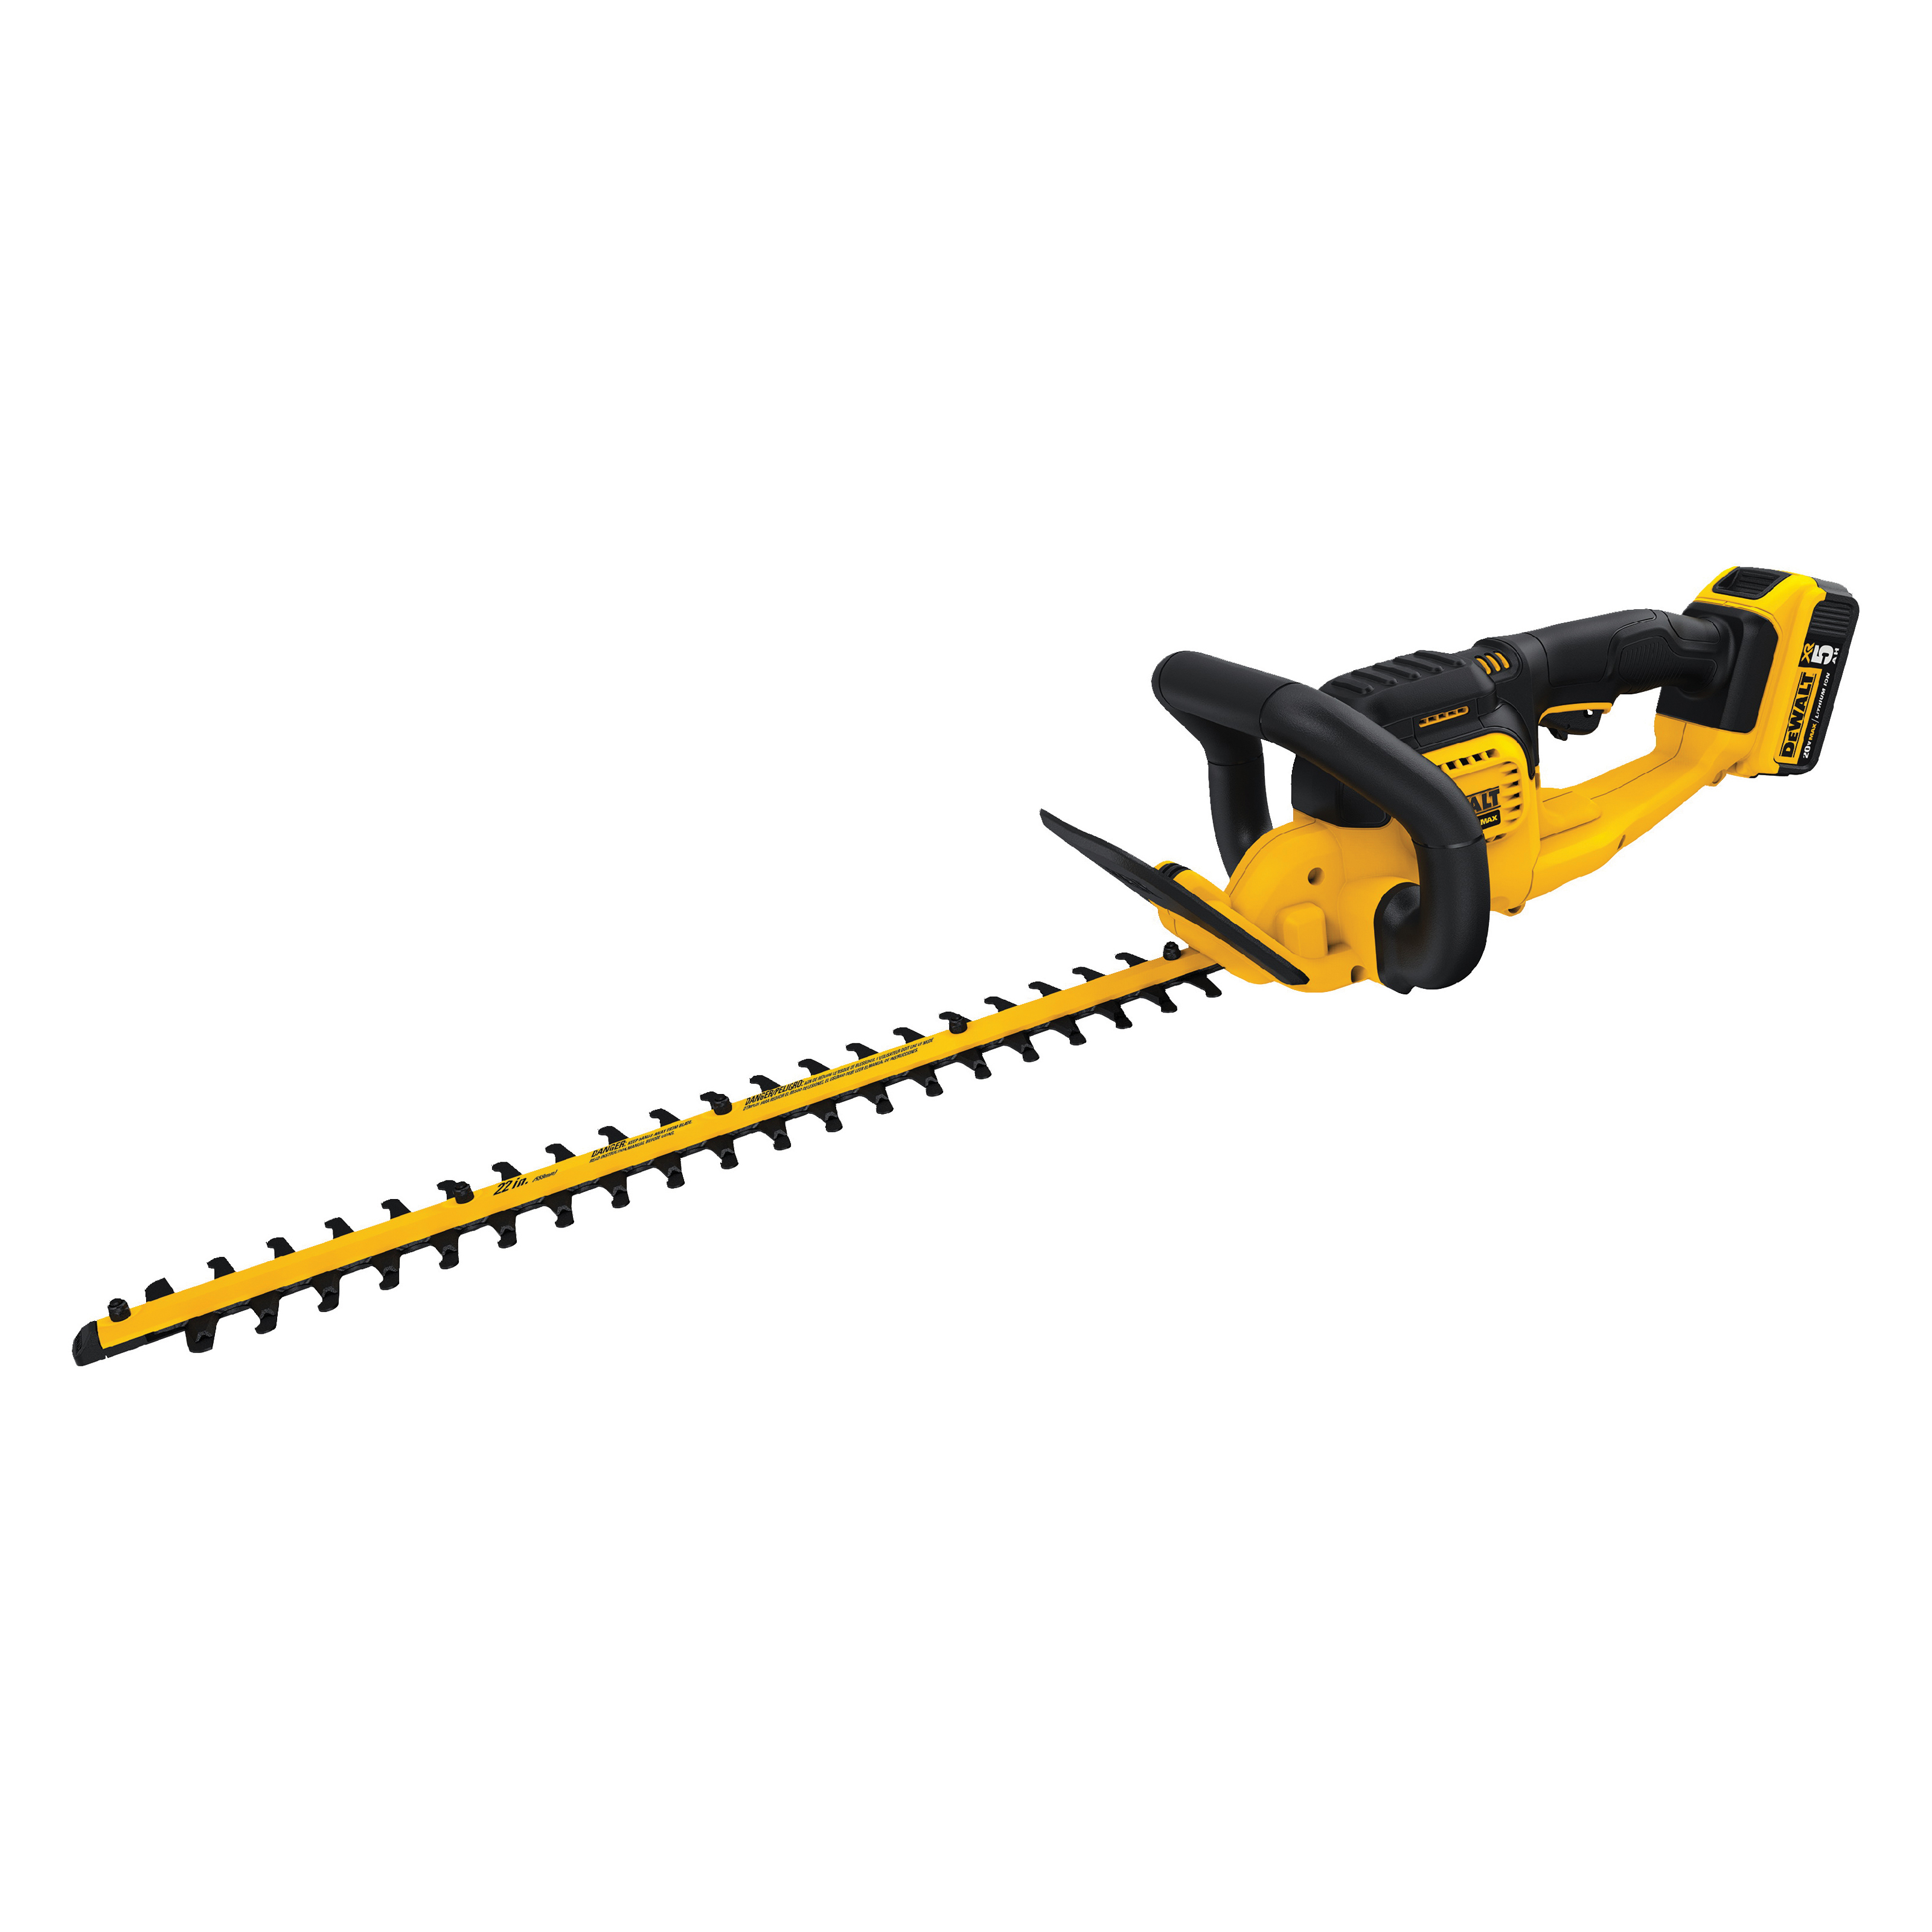 DCHT820P1 Electric Hedge Trimmer, 20 V, 3/4 in Cutting Capacity, 22 in L Blade